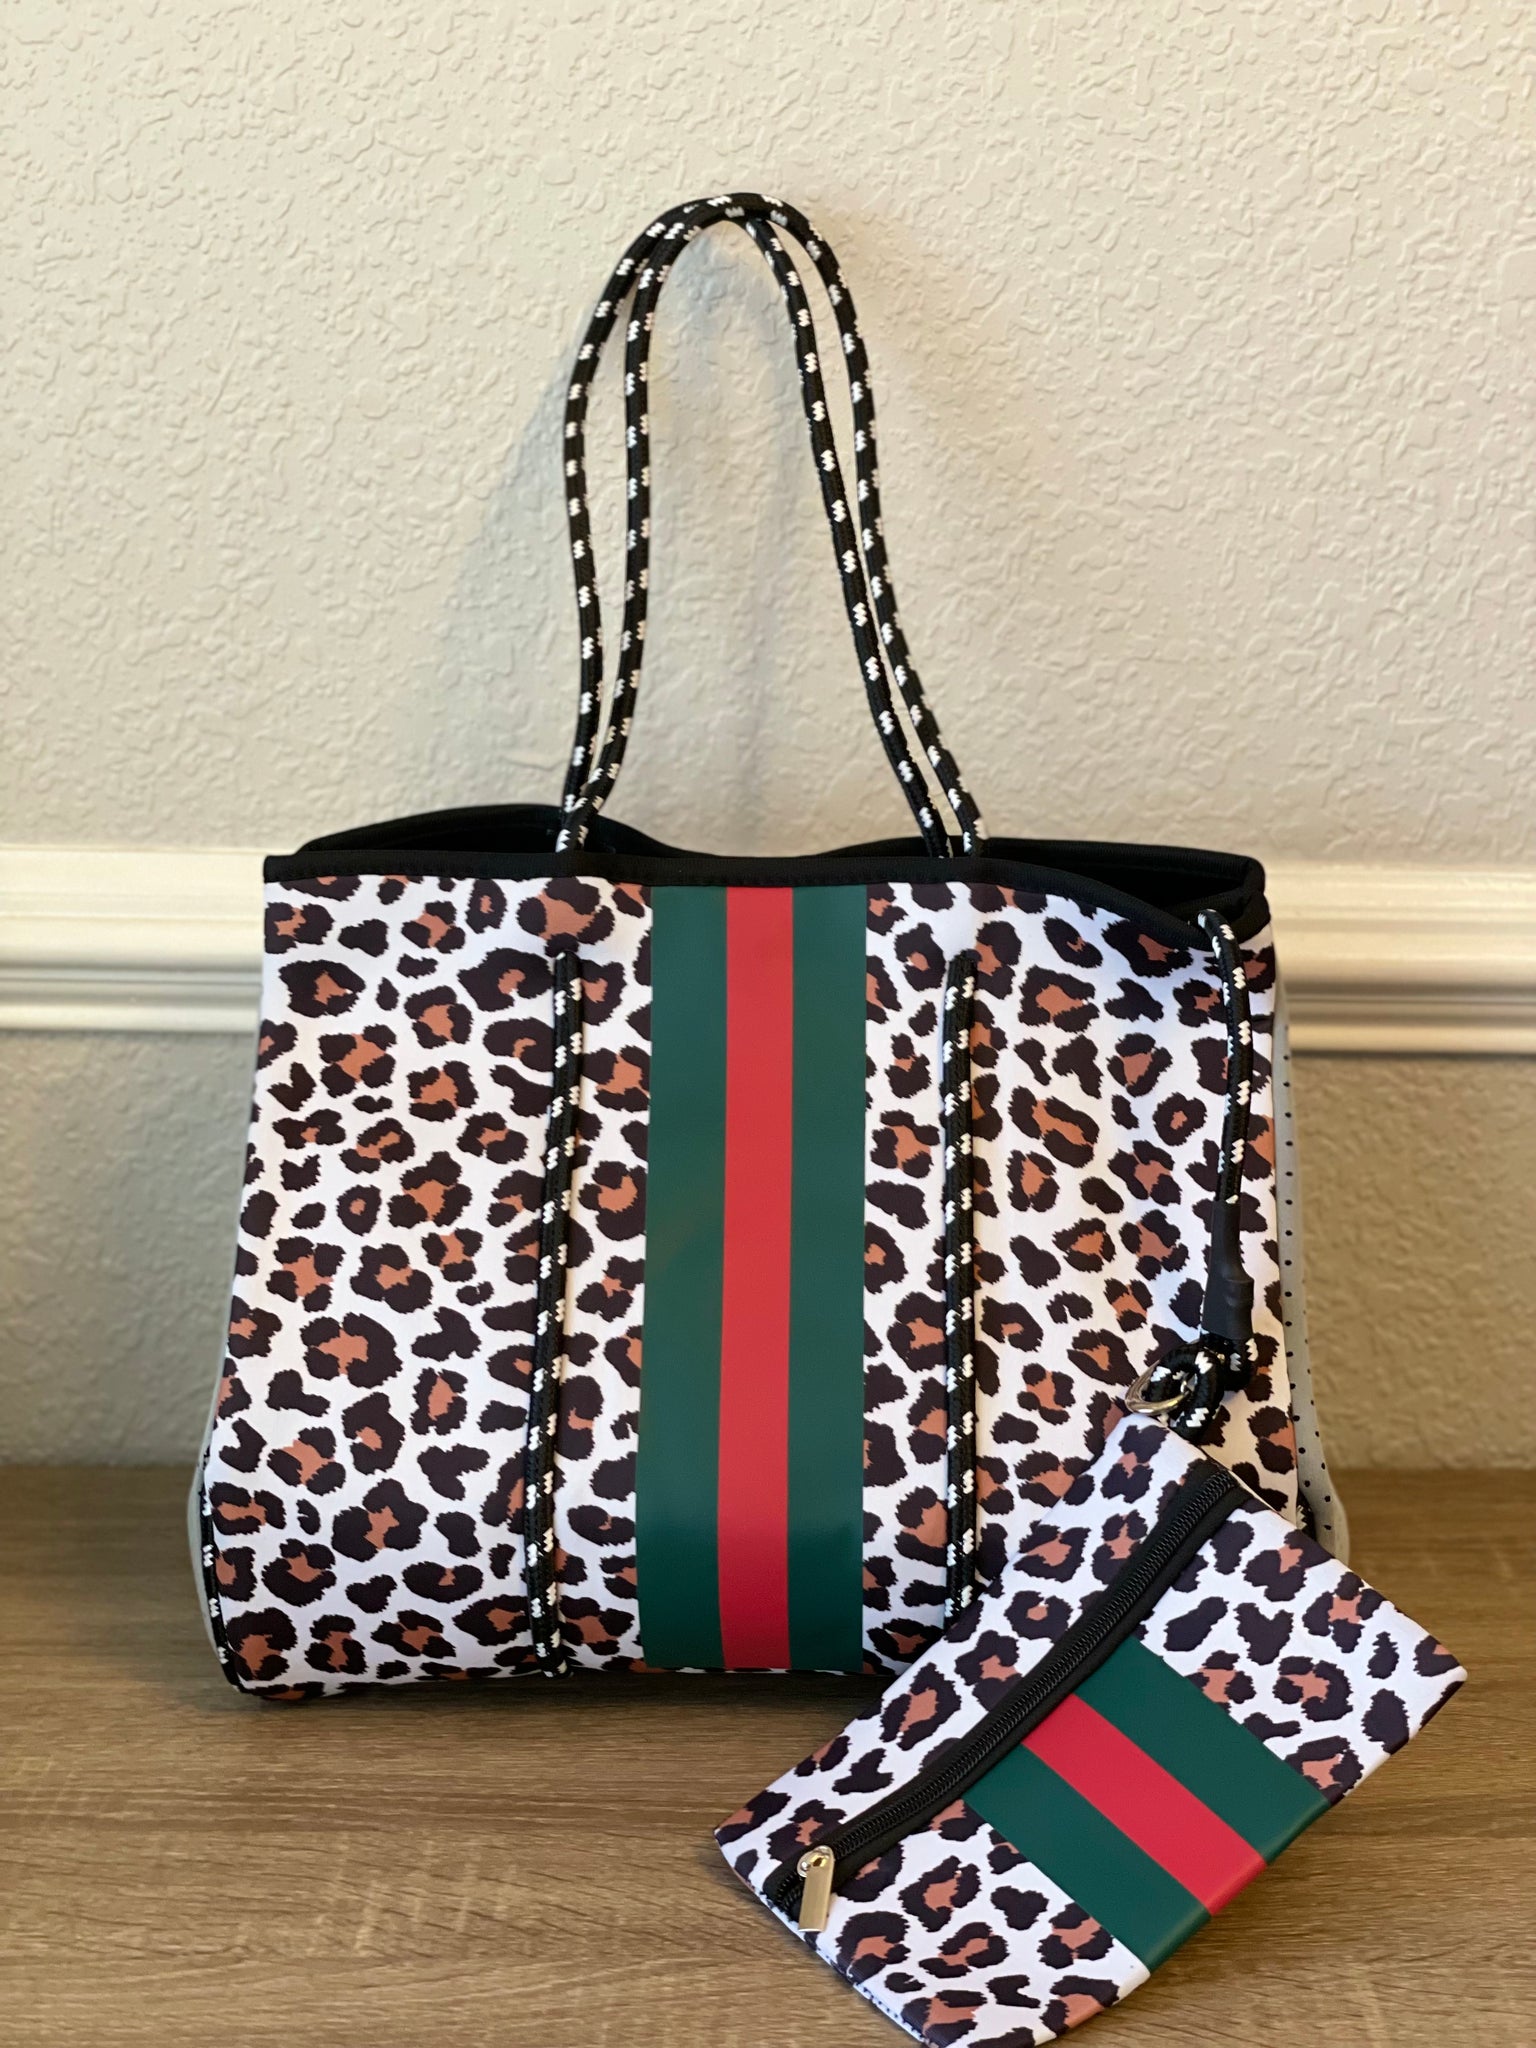 Neoprene Tote Bag Leopard with Green and Red Stripes